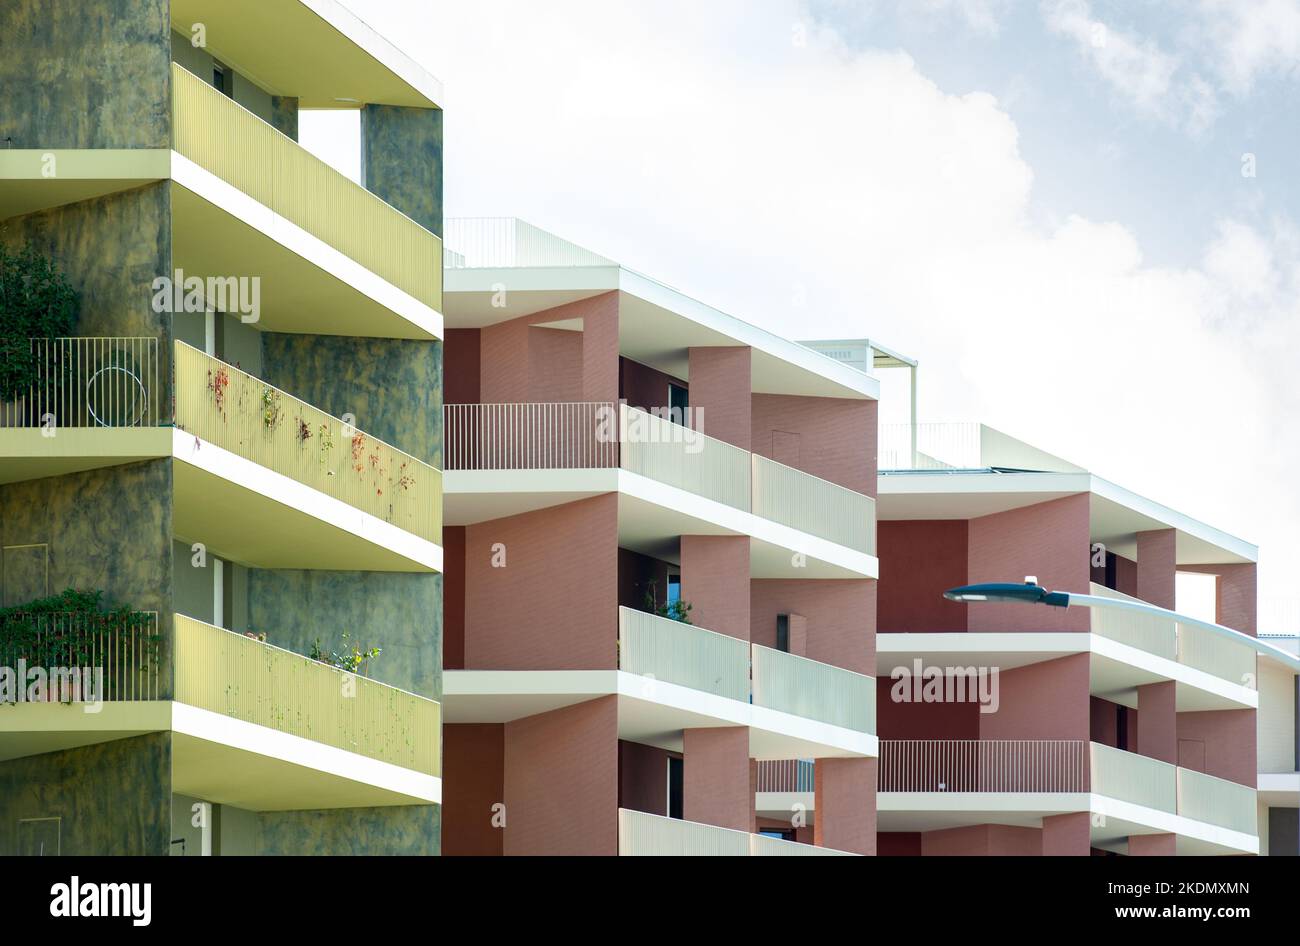 Modern European residential apartment buildings. Architectural details, geometric lines. Stock Photo